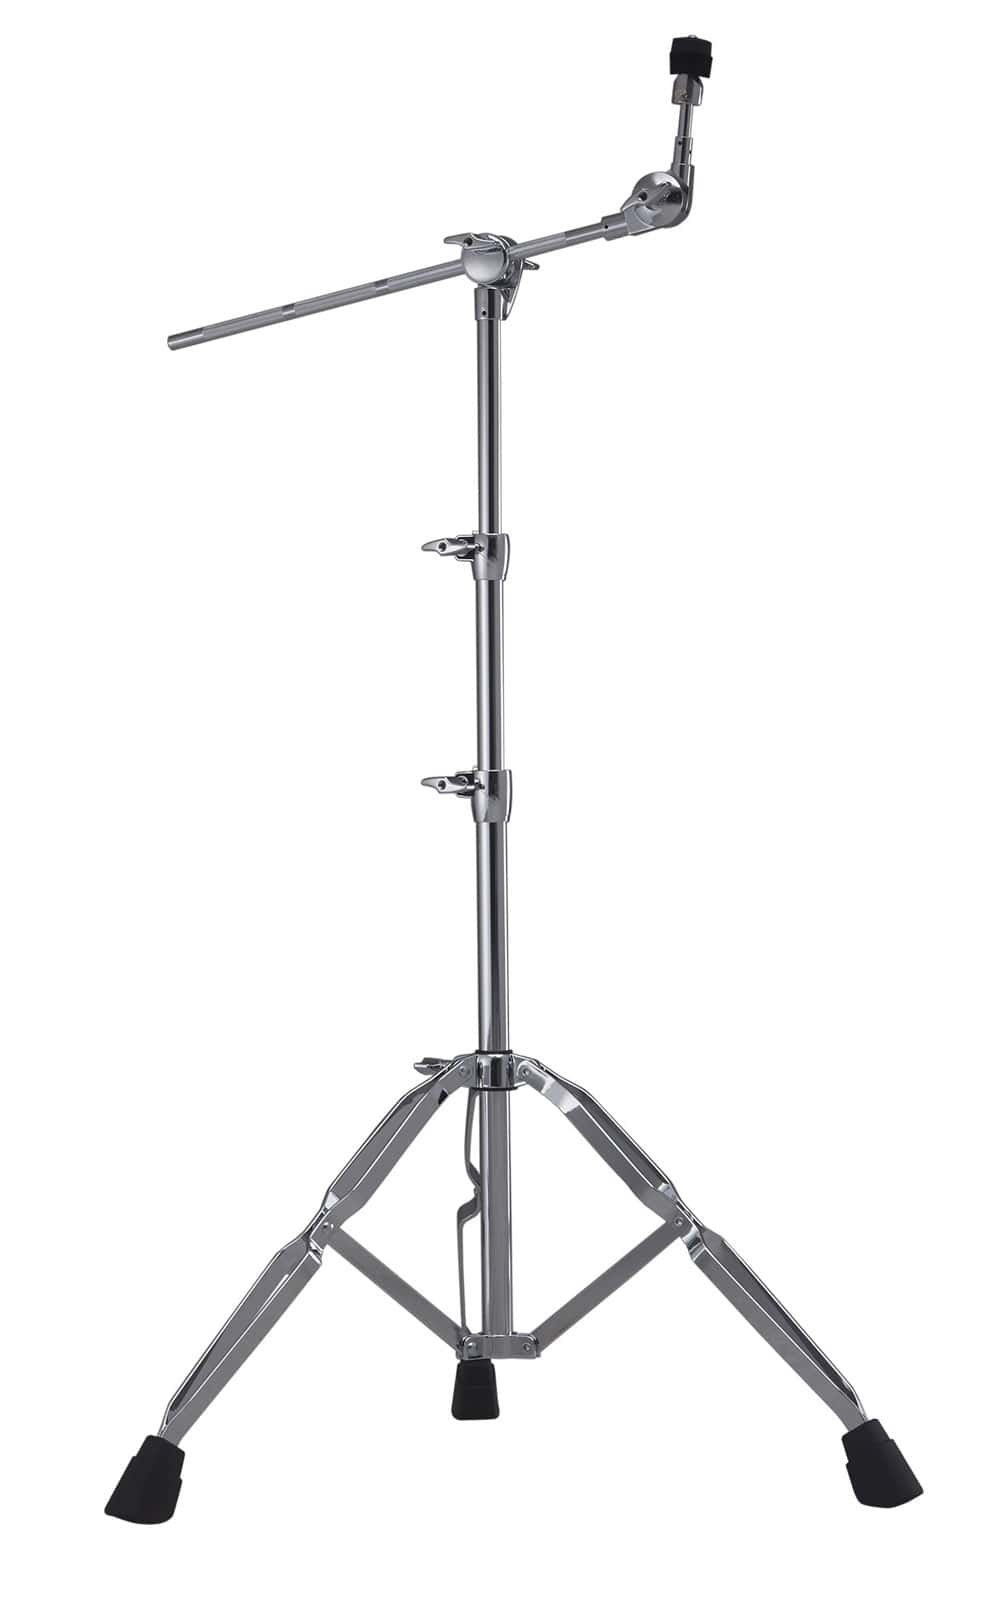 ROLAND DOUBLE-BRACED BOOM STAND FOR V-CYMBALS - DBS-10